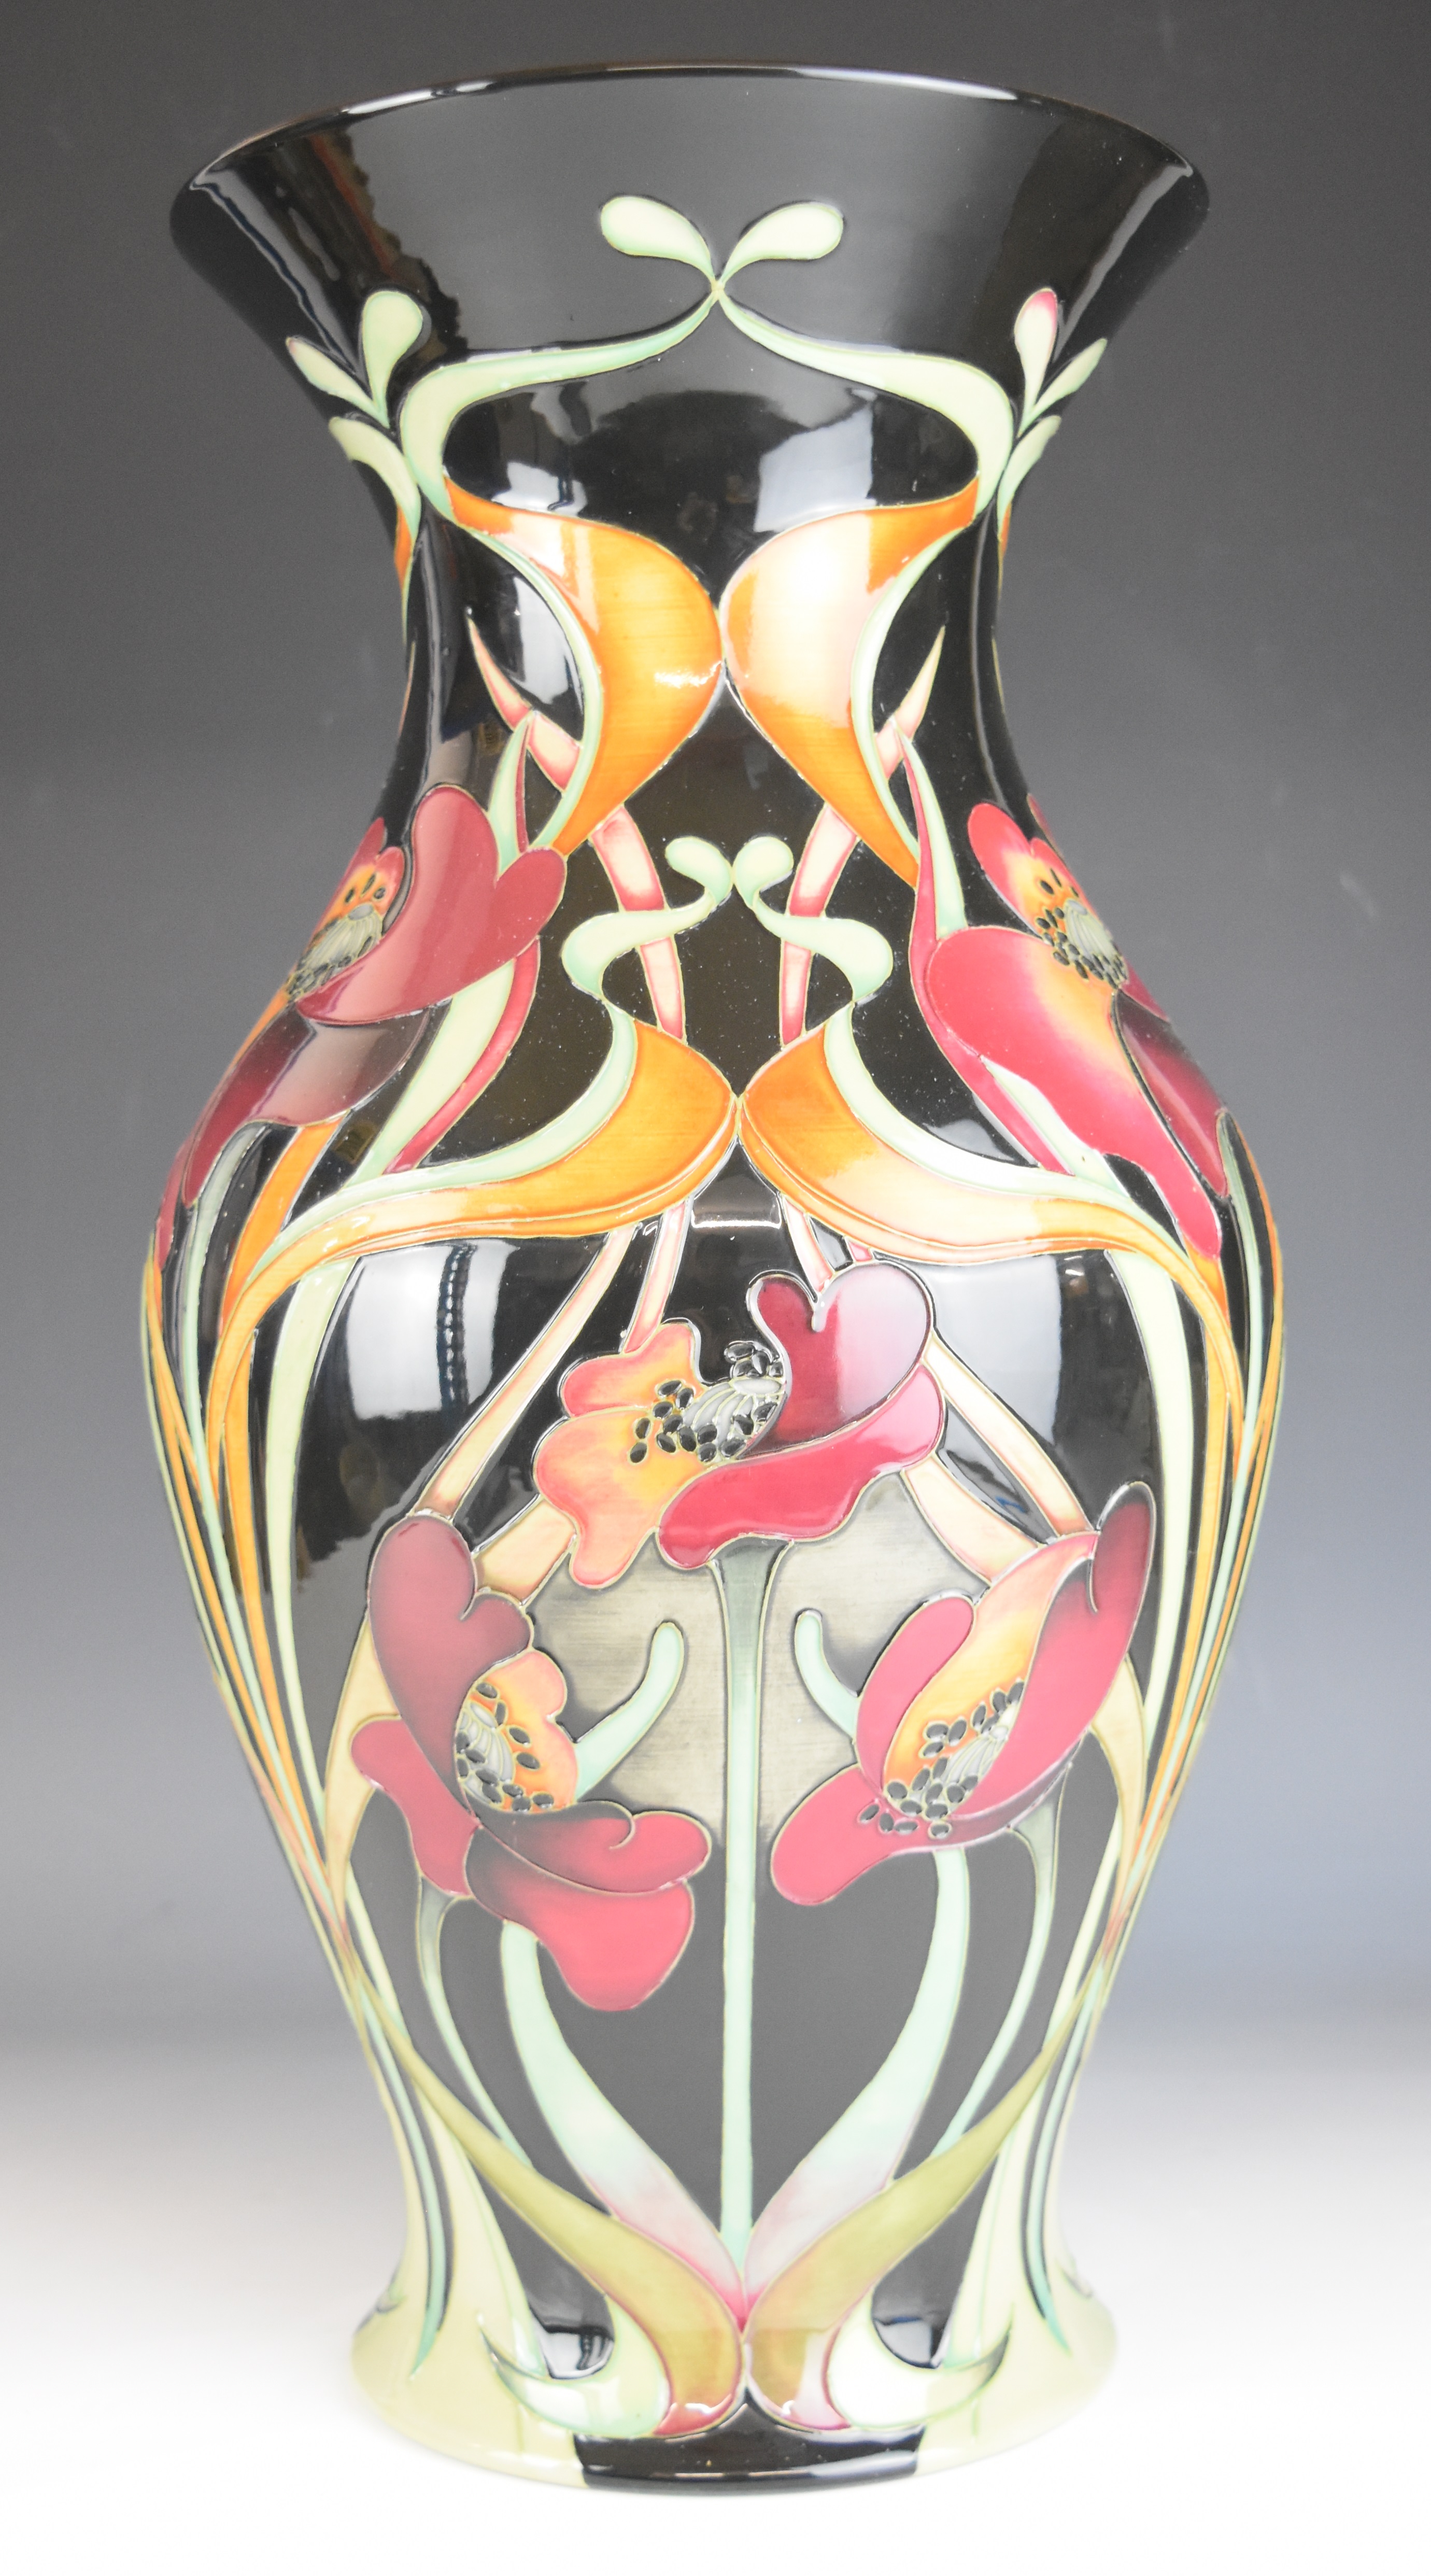 Moorcroft prestige vase 'In Praise of Poppies' with 'Trial 22-7-11' to base and label stating - Image 8 of 12